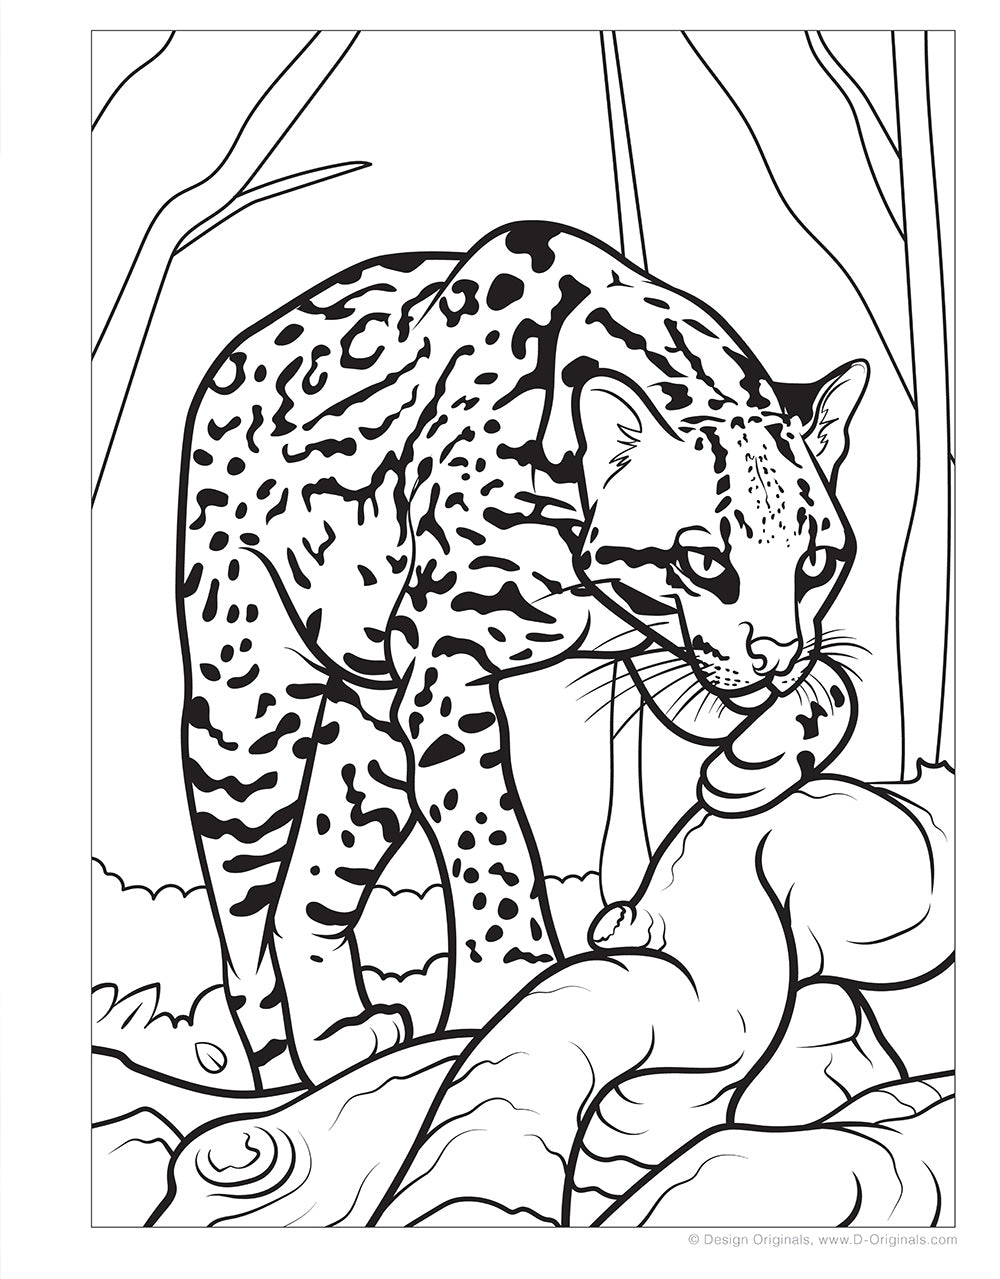 Great amazon rainforest coloring book with stickers â fox chapel publishing co